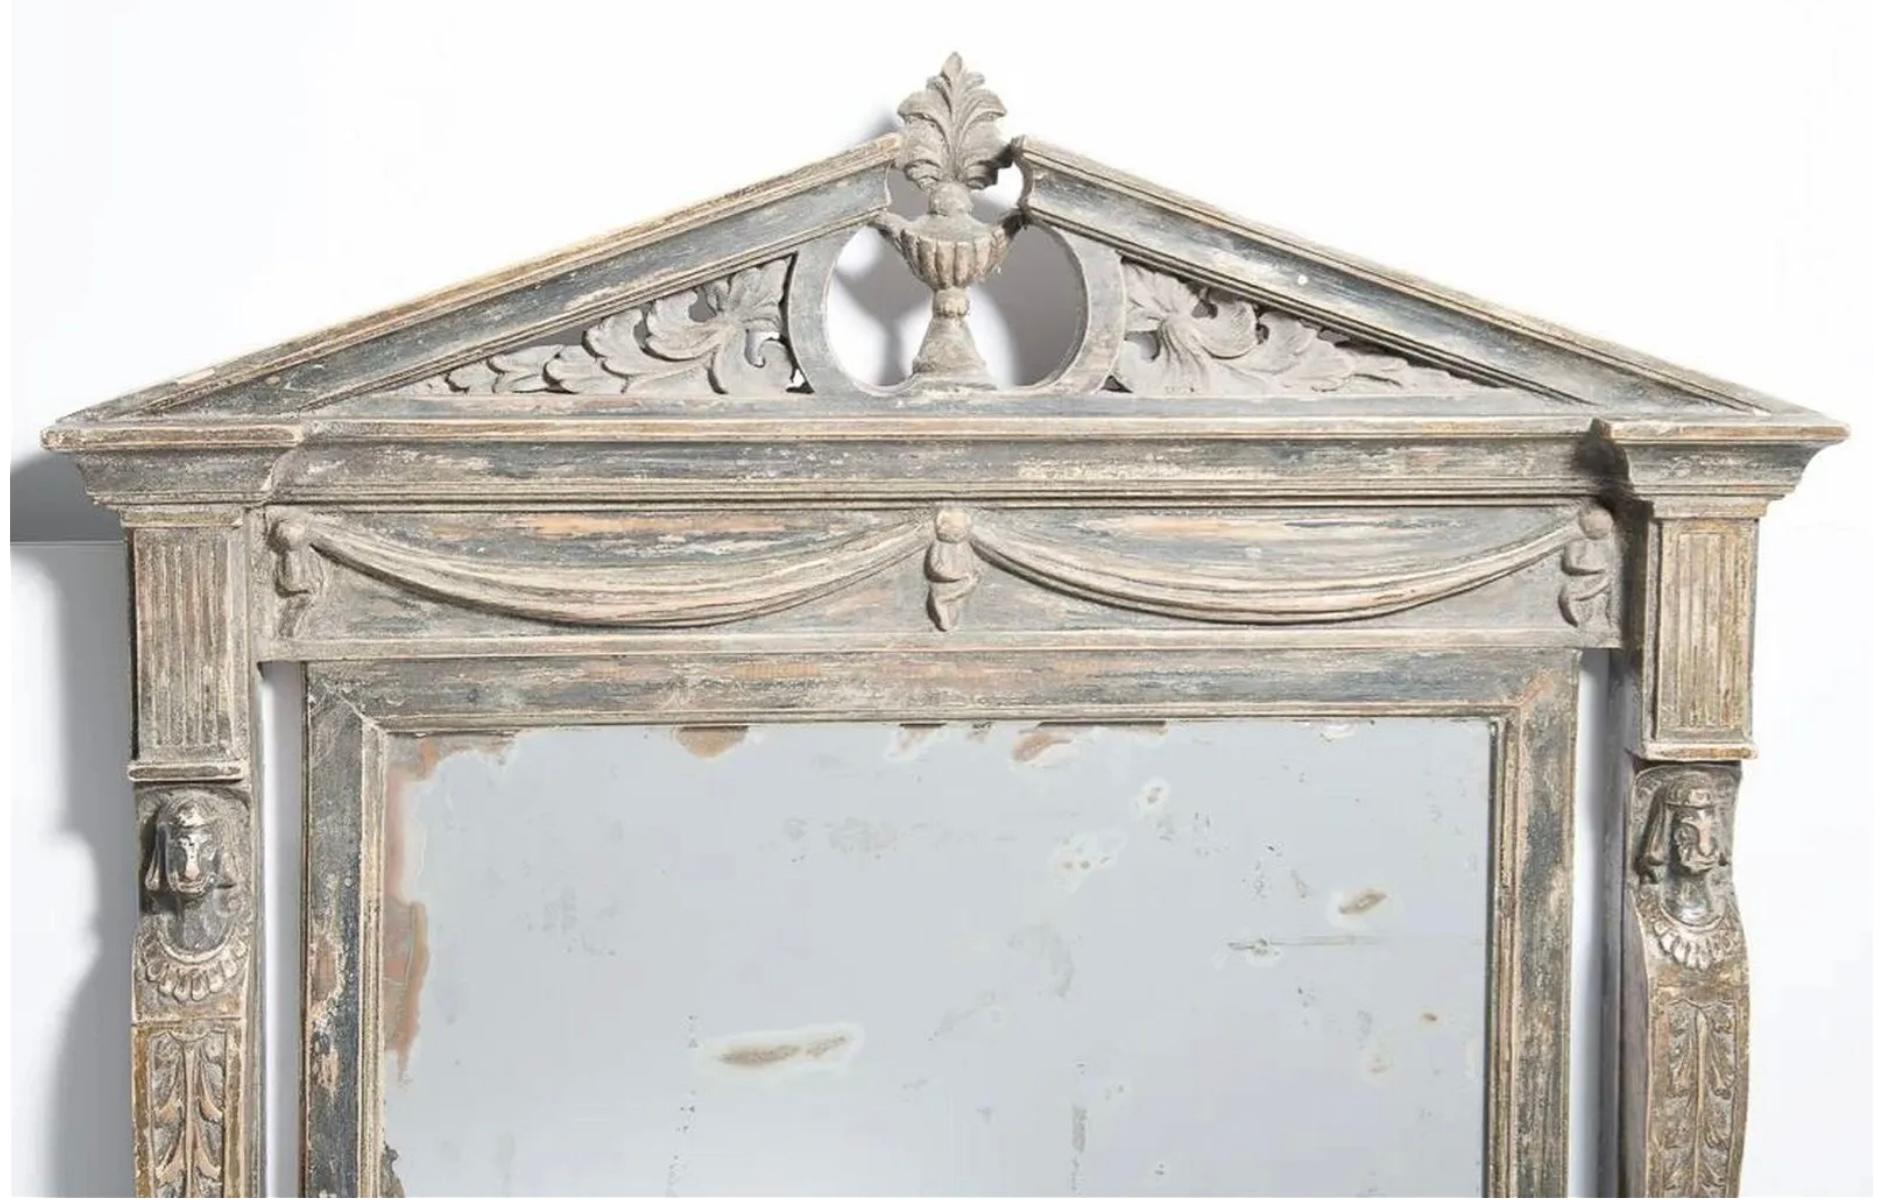 19th Century Swedish Neoclassical carved and painted Pediment Mirror.  Antique painted gray, Swedish Broken Pediment wall mirror, C.1850. Adorned with caryatides figures on each side and draped garland at the top. Original antique mirror.
